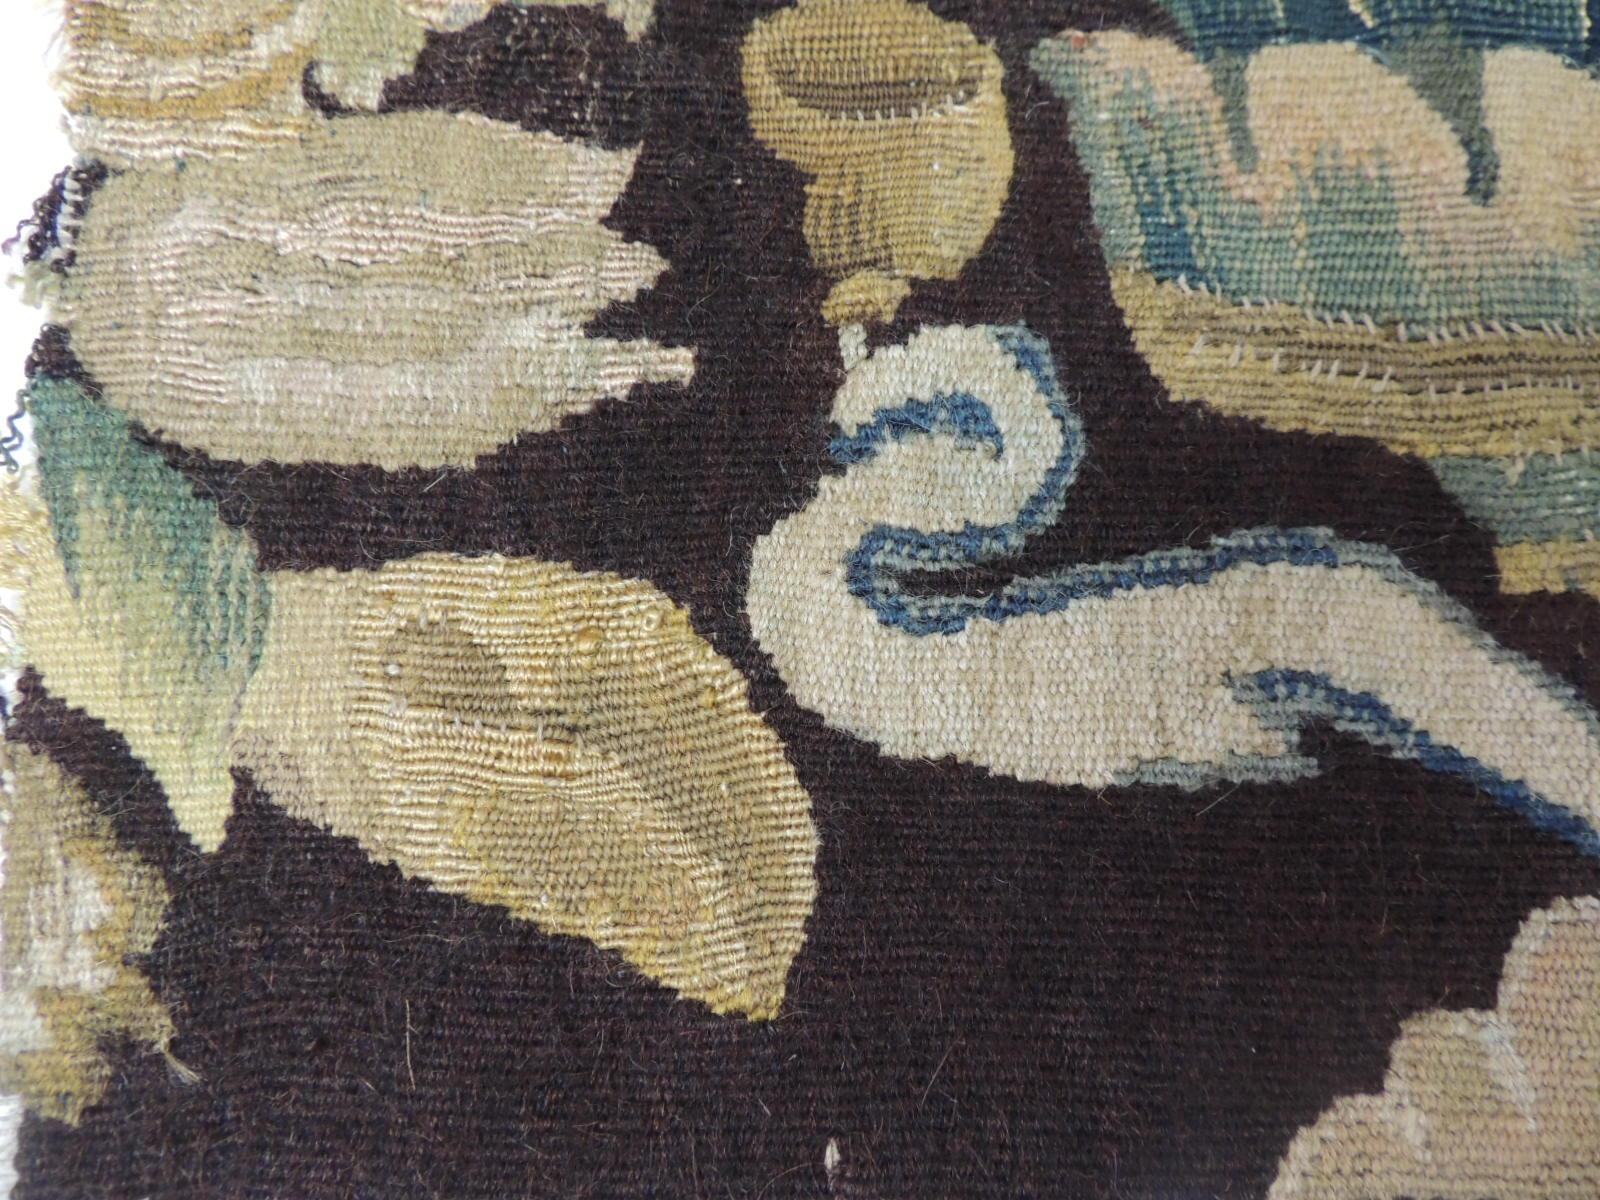 19th century fragment of green and brown verdure tapestry. This fragment depicts a floral bouquet in shades of brown, hunter green gold, blue and natural.
The Aubusson tapestry manufacture of the 17th and 18th centuries managed to compete with the